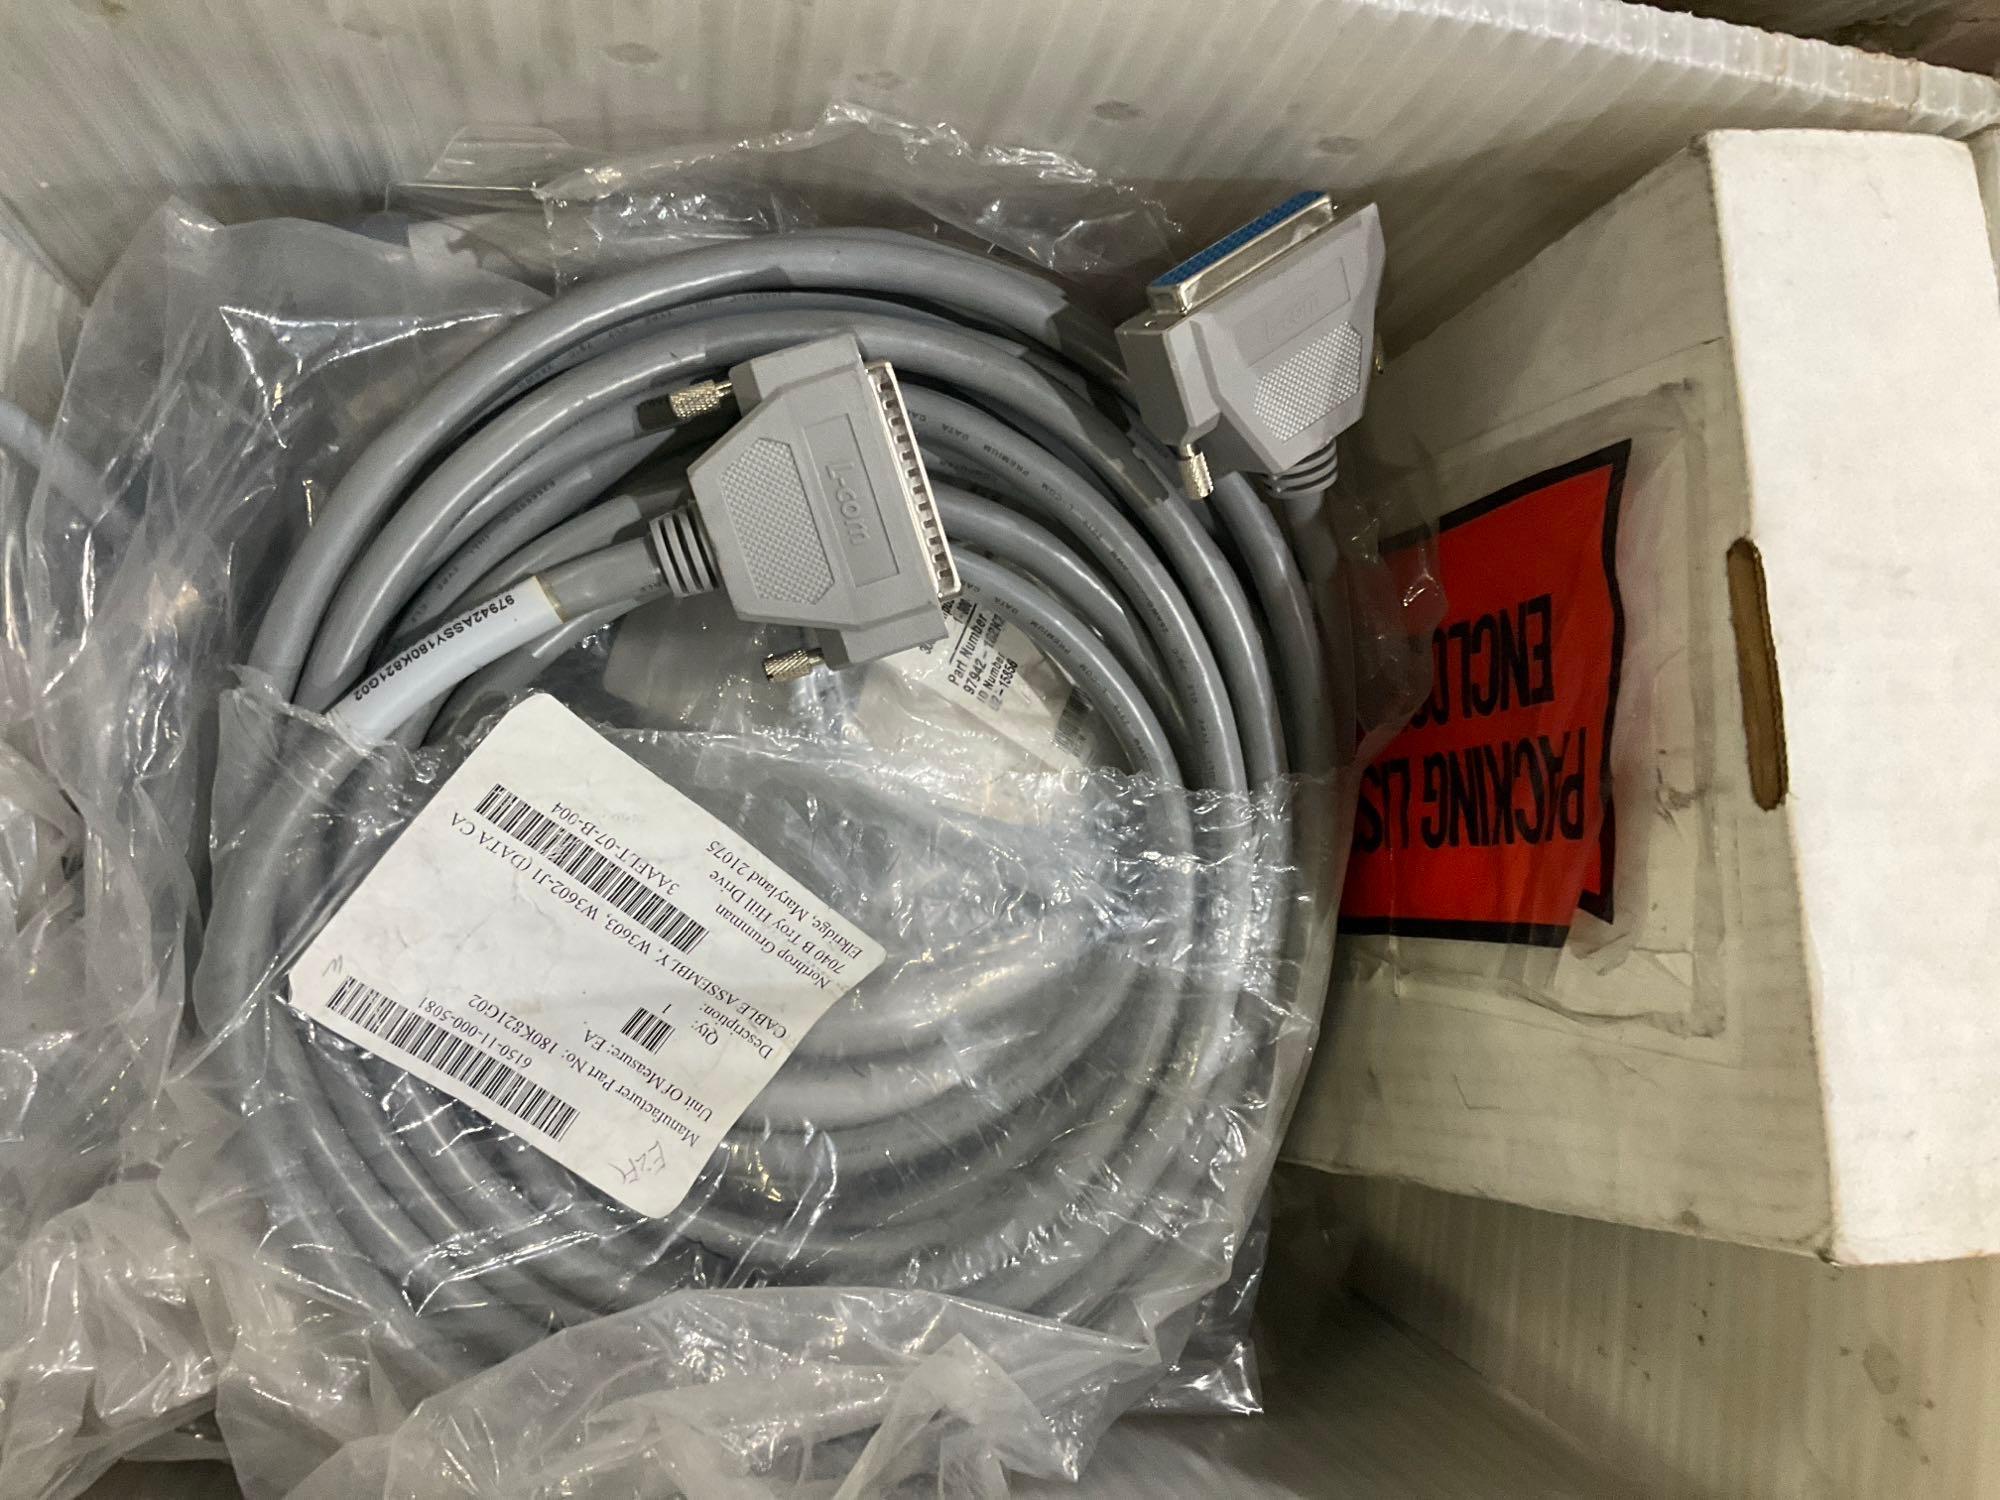 LOT OF TURCK POWER CORDS AND POWER ASSEMBLIES; MULTIPLE SIZES, LENGTHS, AND CAPABILITIES; MOST ARE